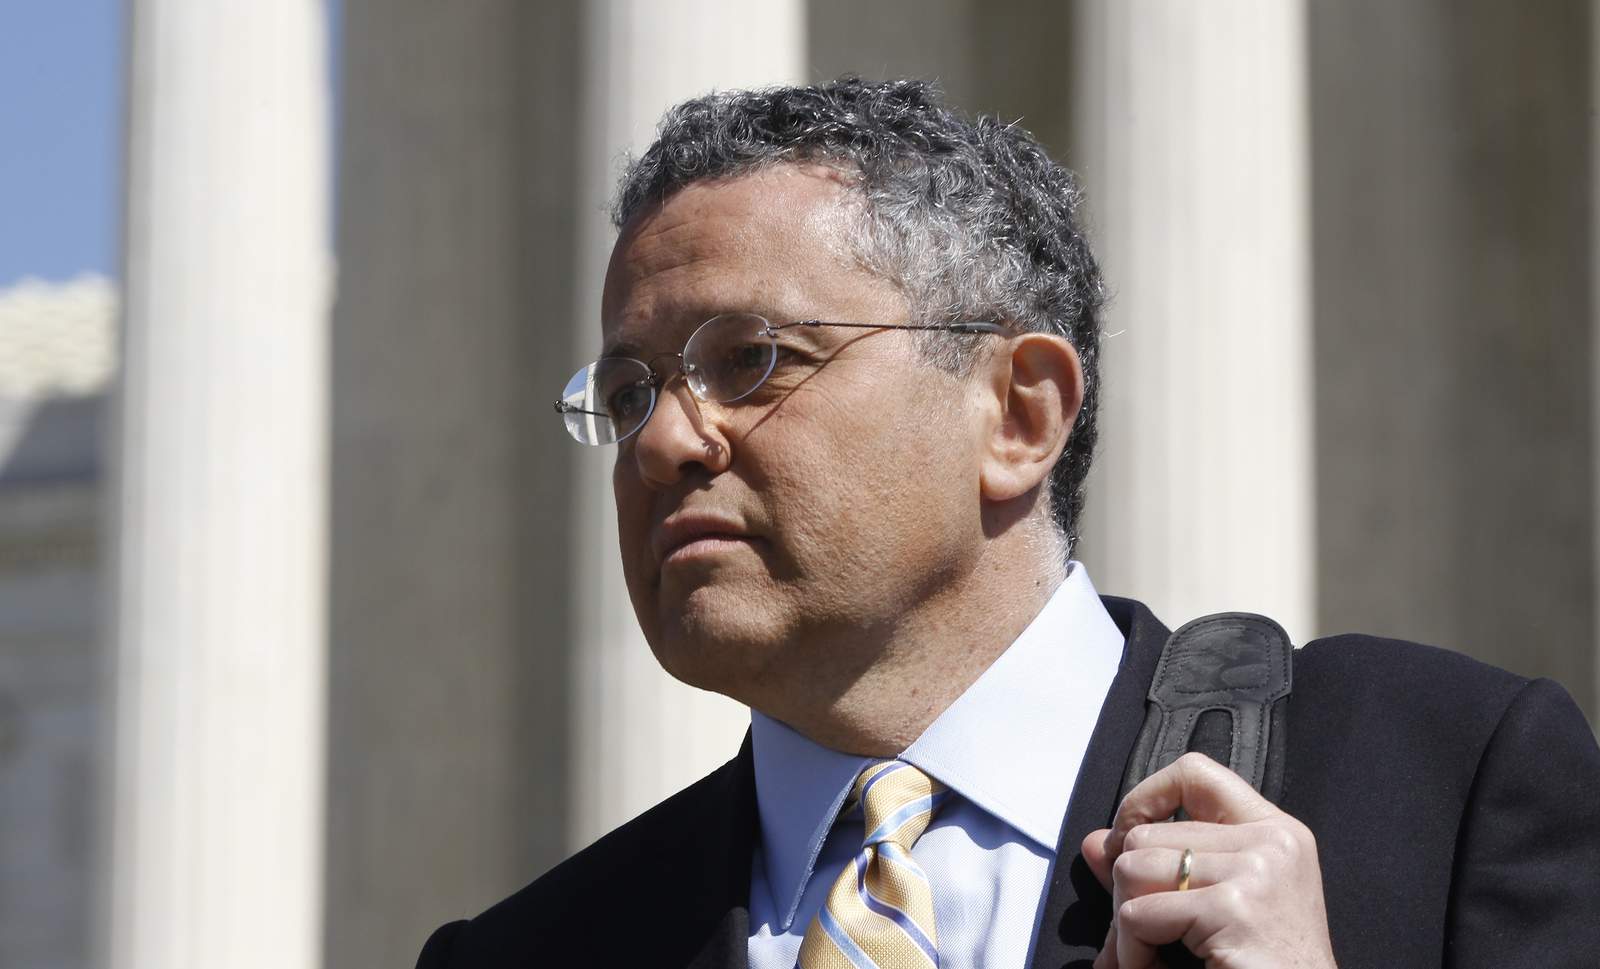 Jeffrey Toobin on leave from New Yorker, CNN after exposing himself during Zoom call